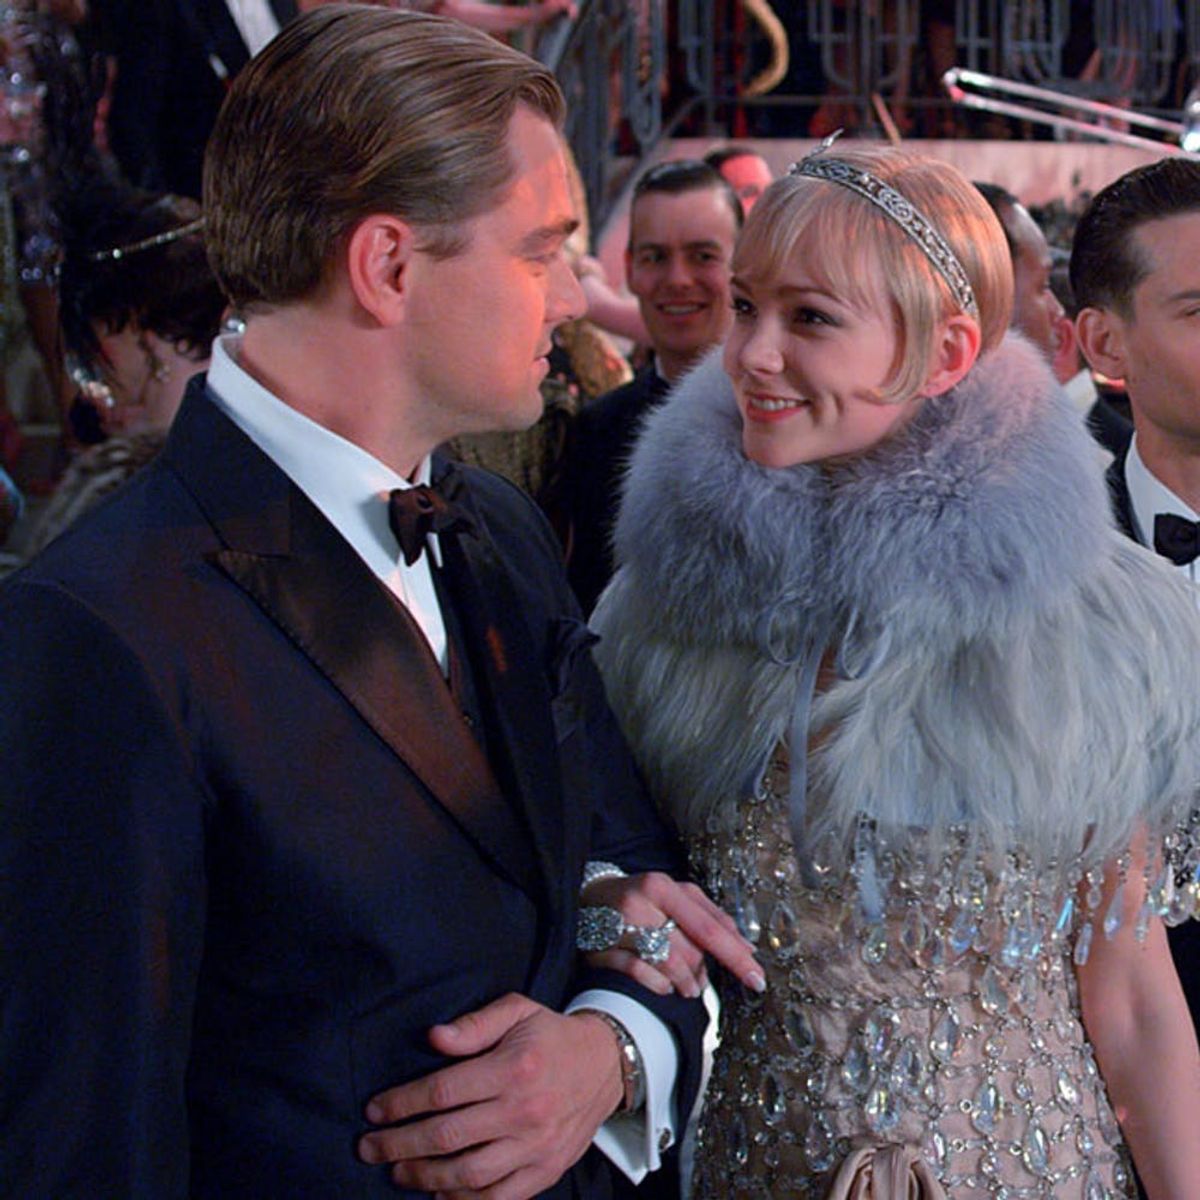 5 Important Love Lessons We Learned from The Great Gatsby